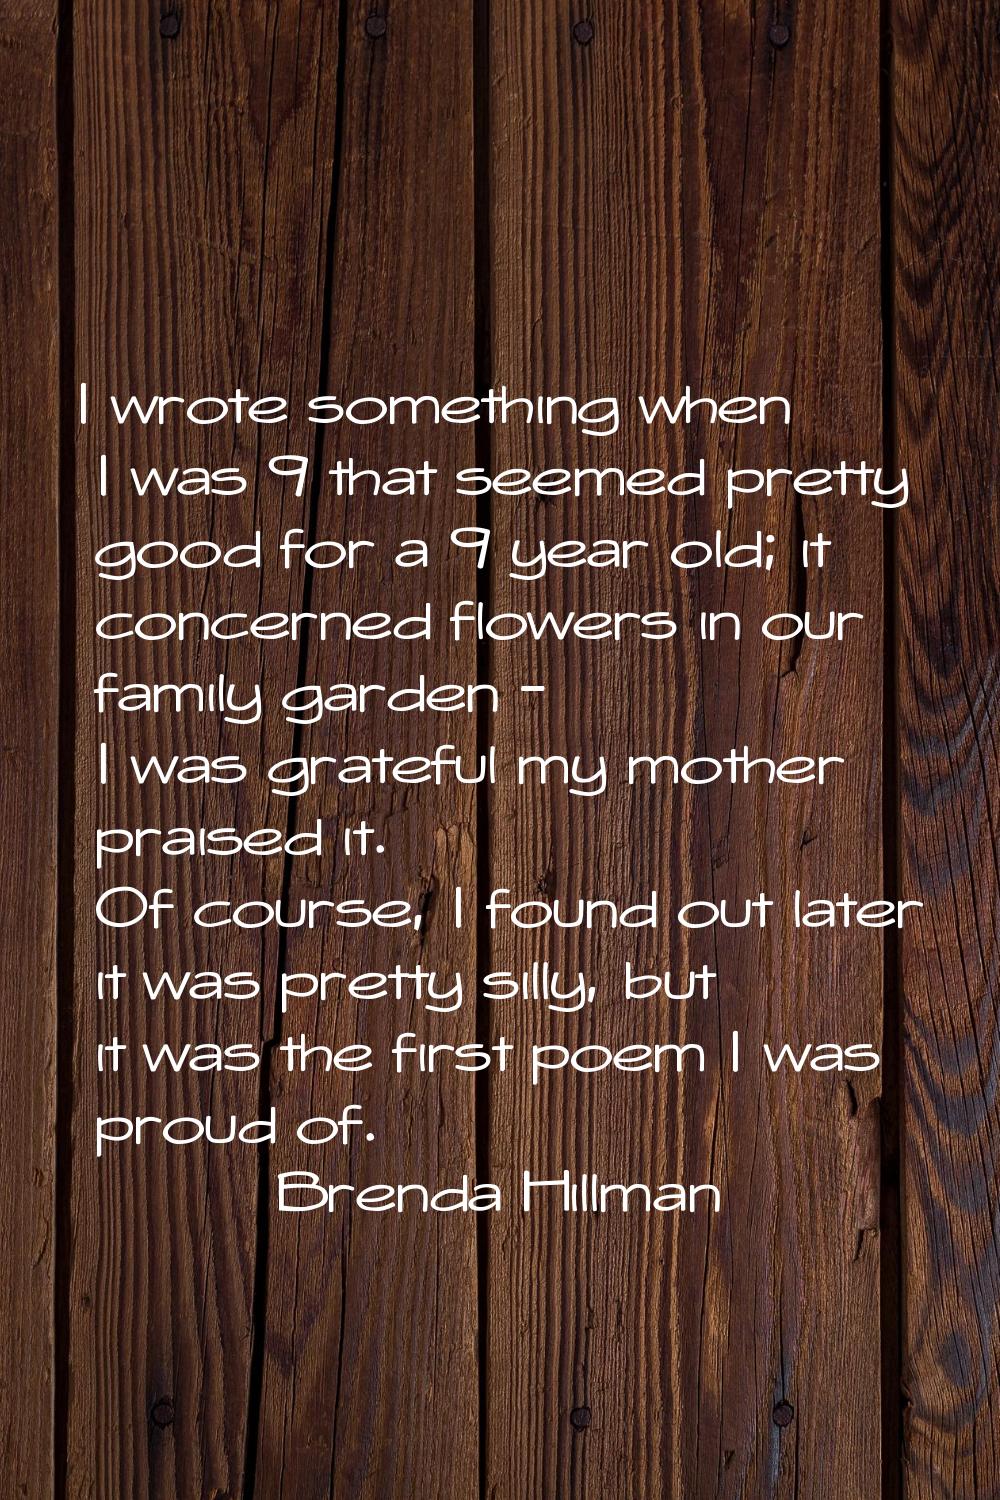 I wrote something when I was 9 that seemed pretty good for a 9 year old; it concerned flowers in ou